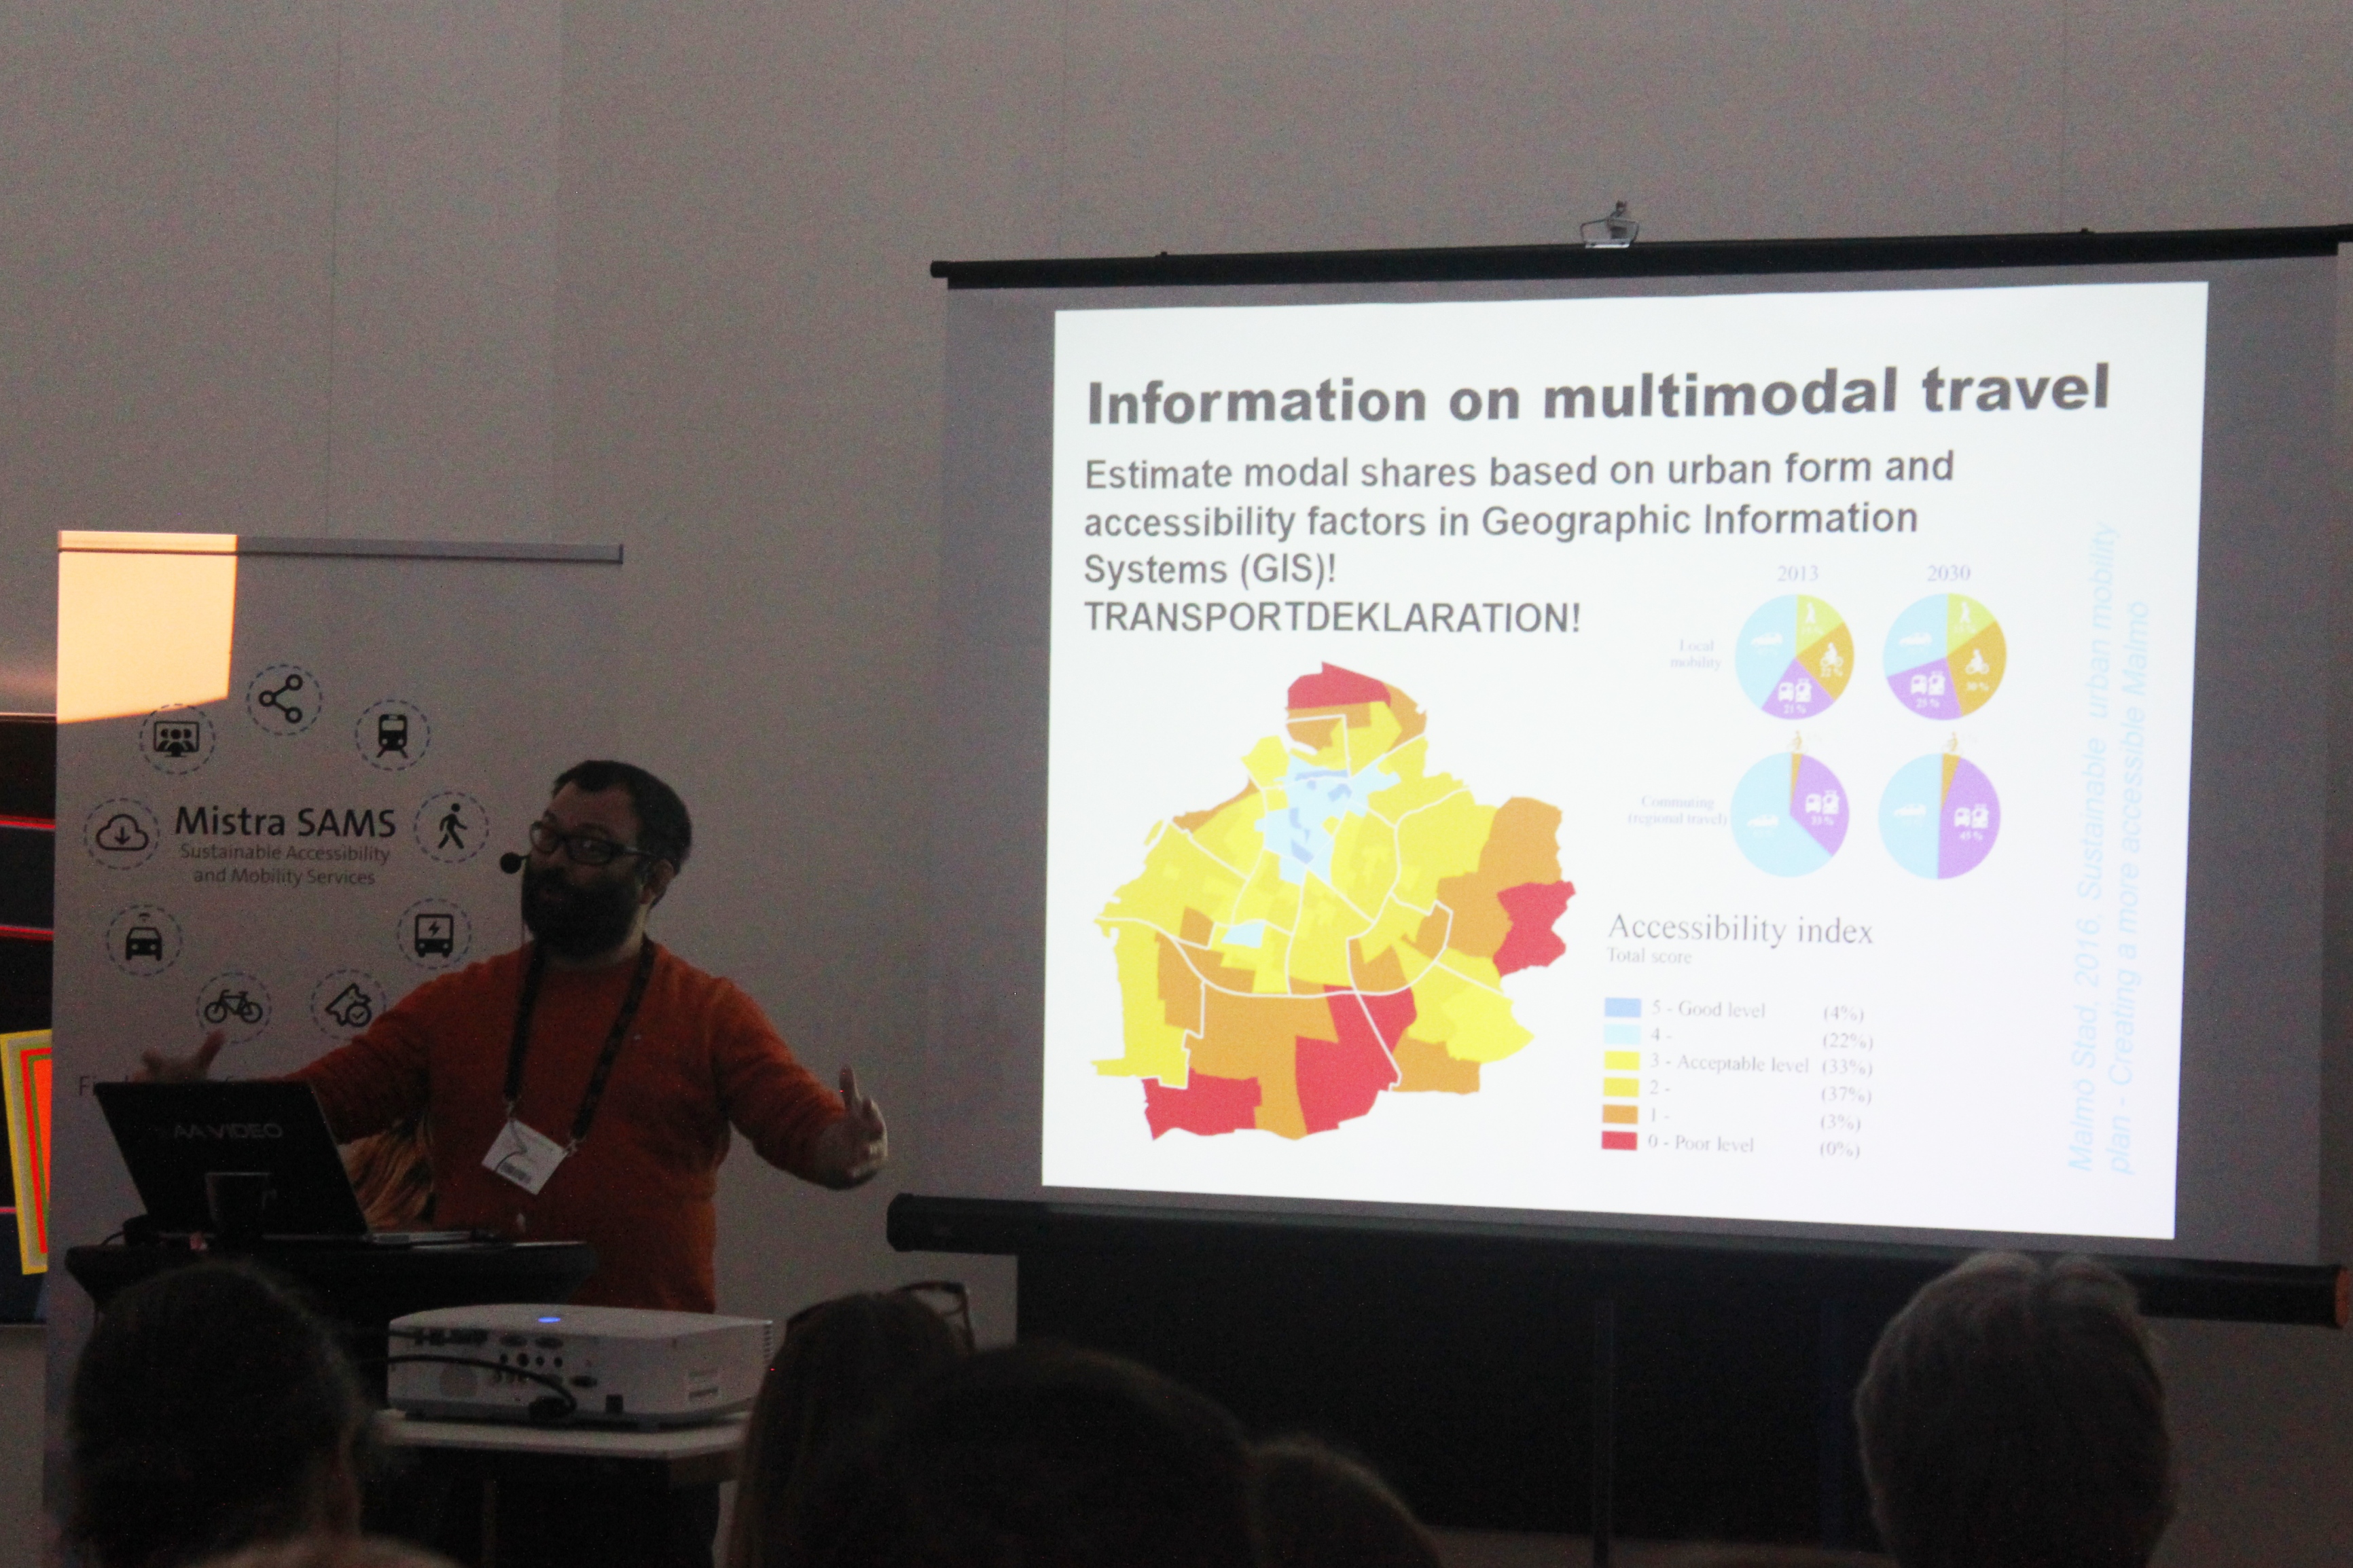 A person holding a presentation, the current slide shows a map with different parts in yellow, red and orange.